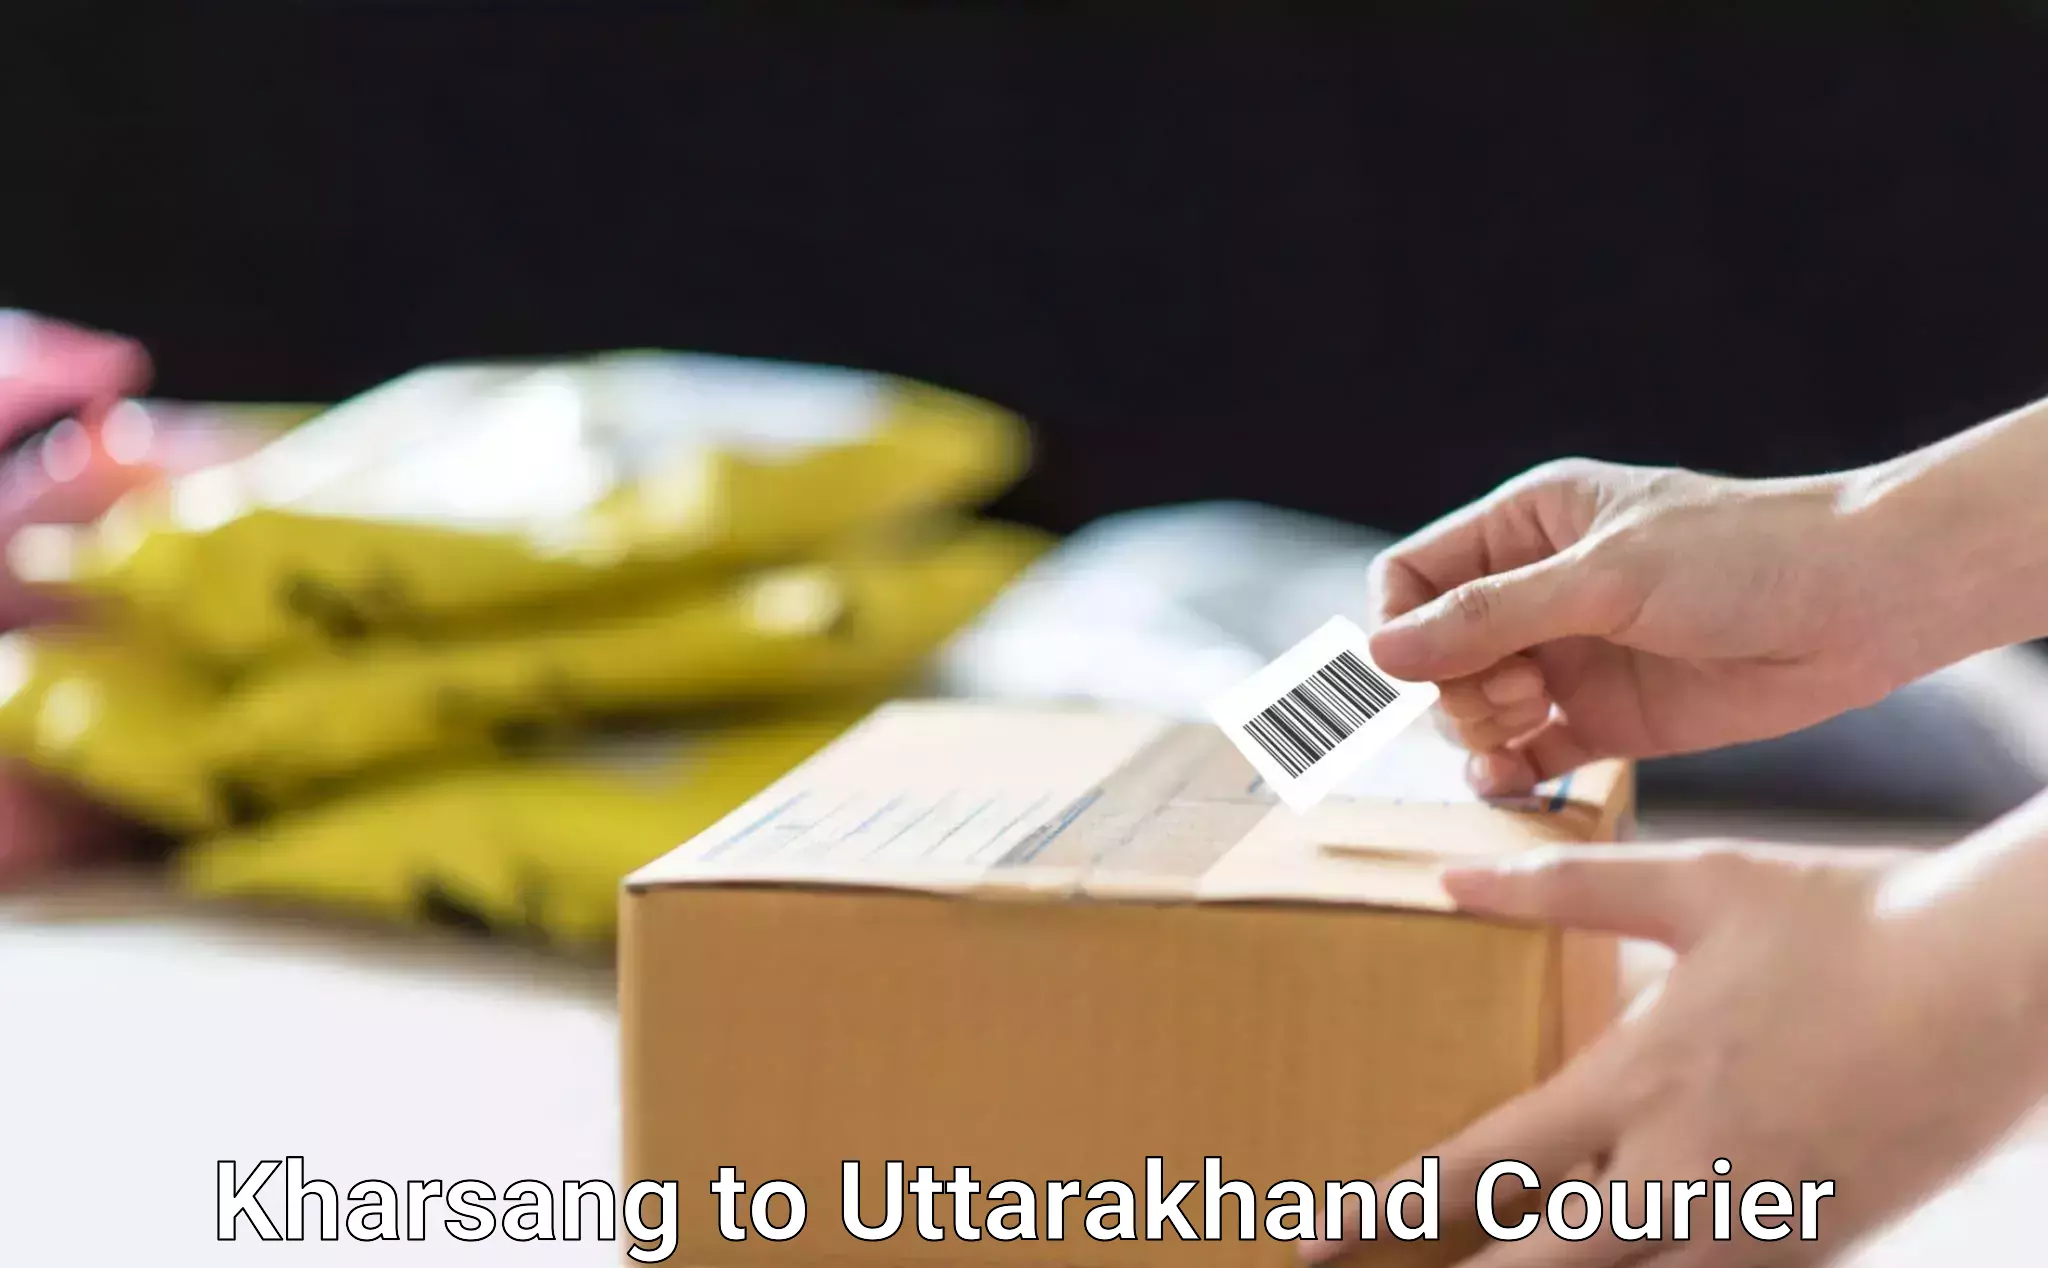 Parcel handling and care Kharsang to Lohaghat